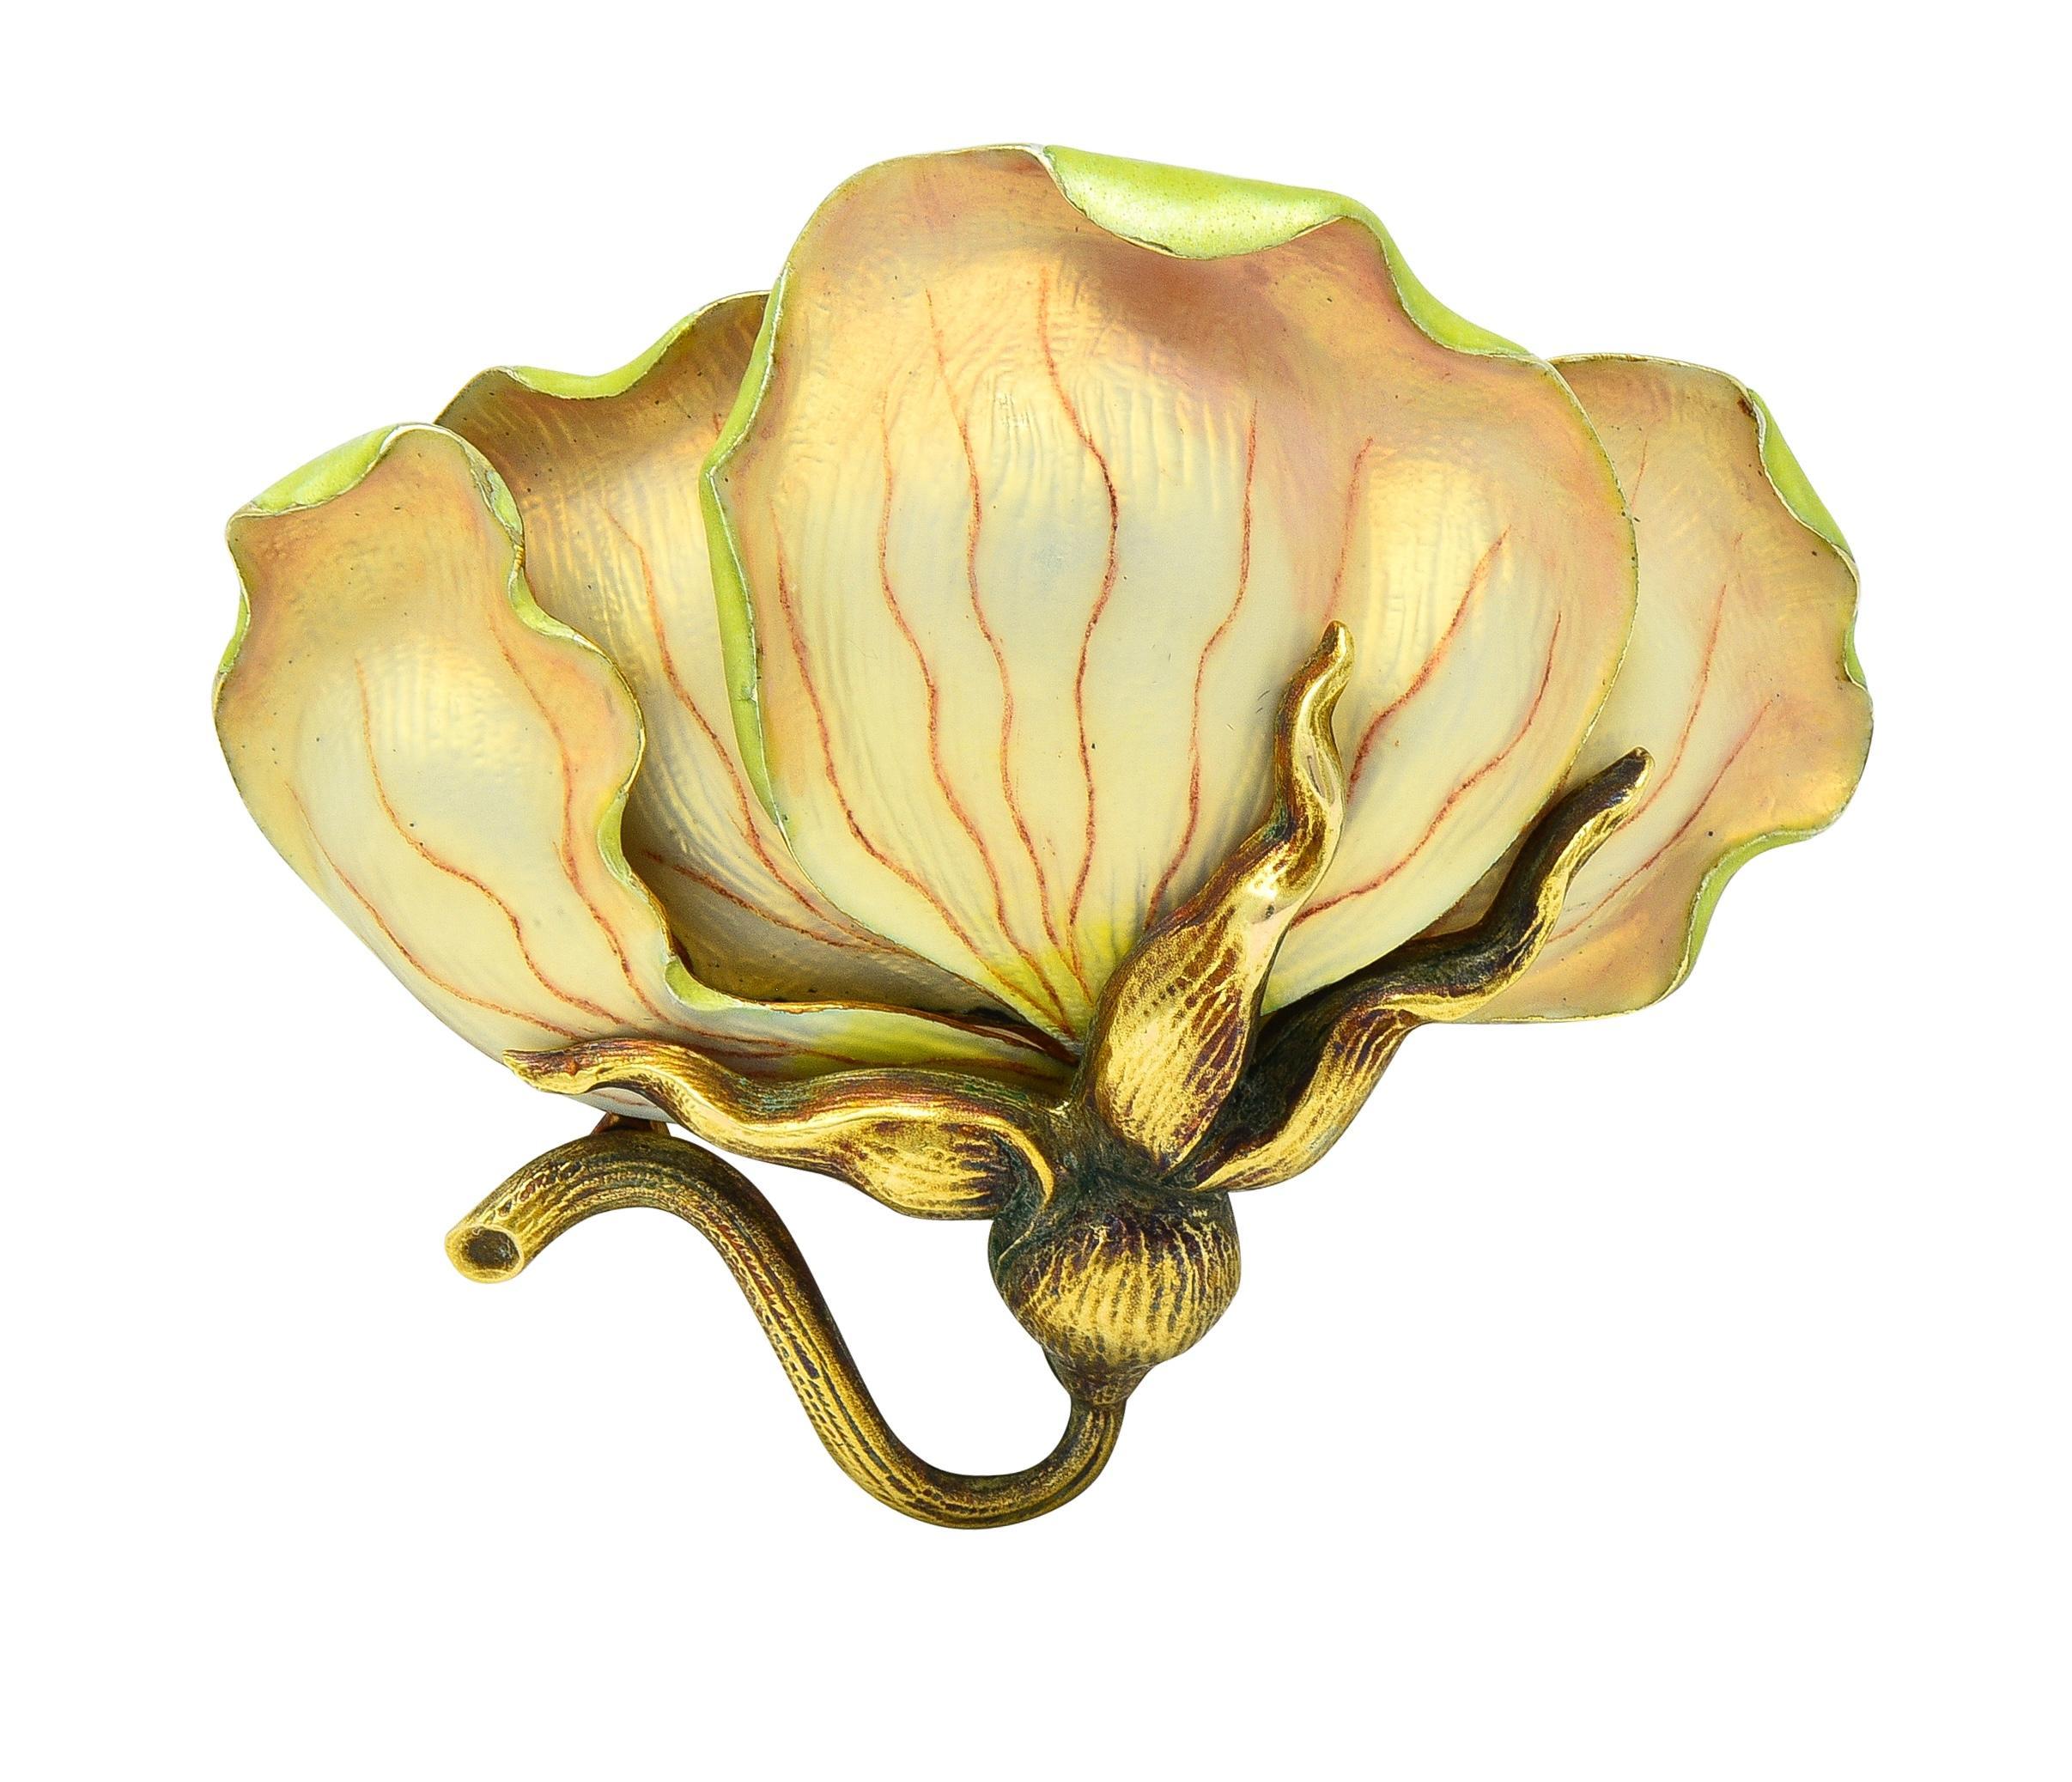 Designed as a dimensional plucked flower in profile with curling petals and winding stem
Petals are painted with basse-taille enamel over linear engraving 
Matte iridescent yellow and pink with red veining - minimal loss
Foliage and stem are